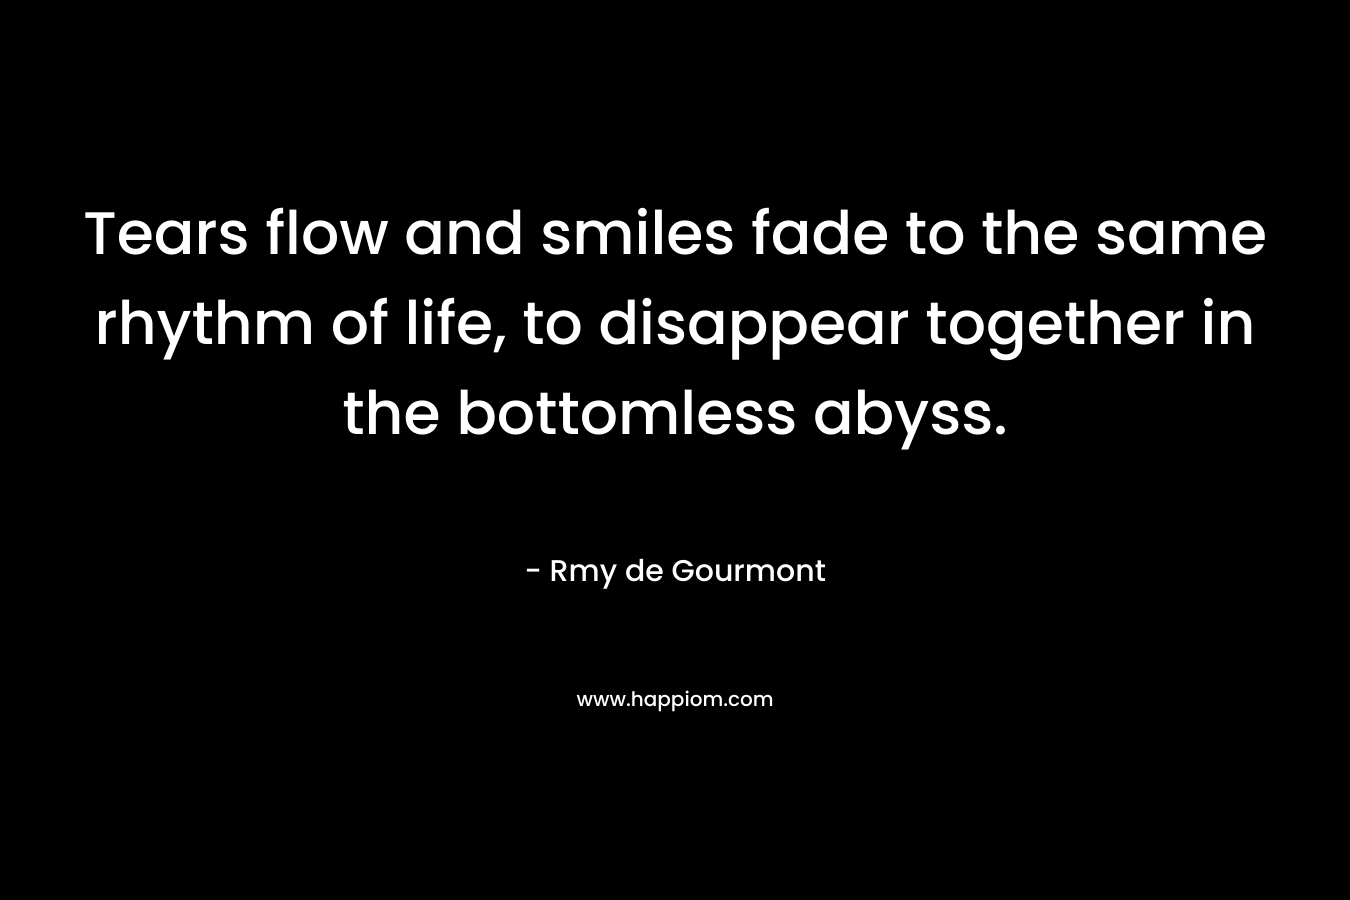 Tears flow and smiles fade to the same rhythm of life, to disappear together in the bottomless abyss.